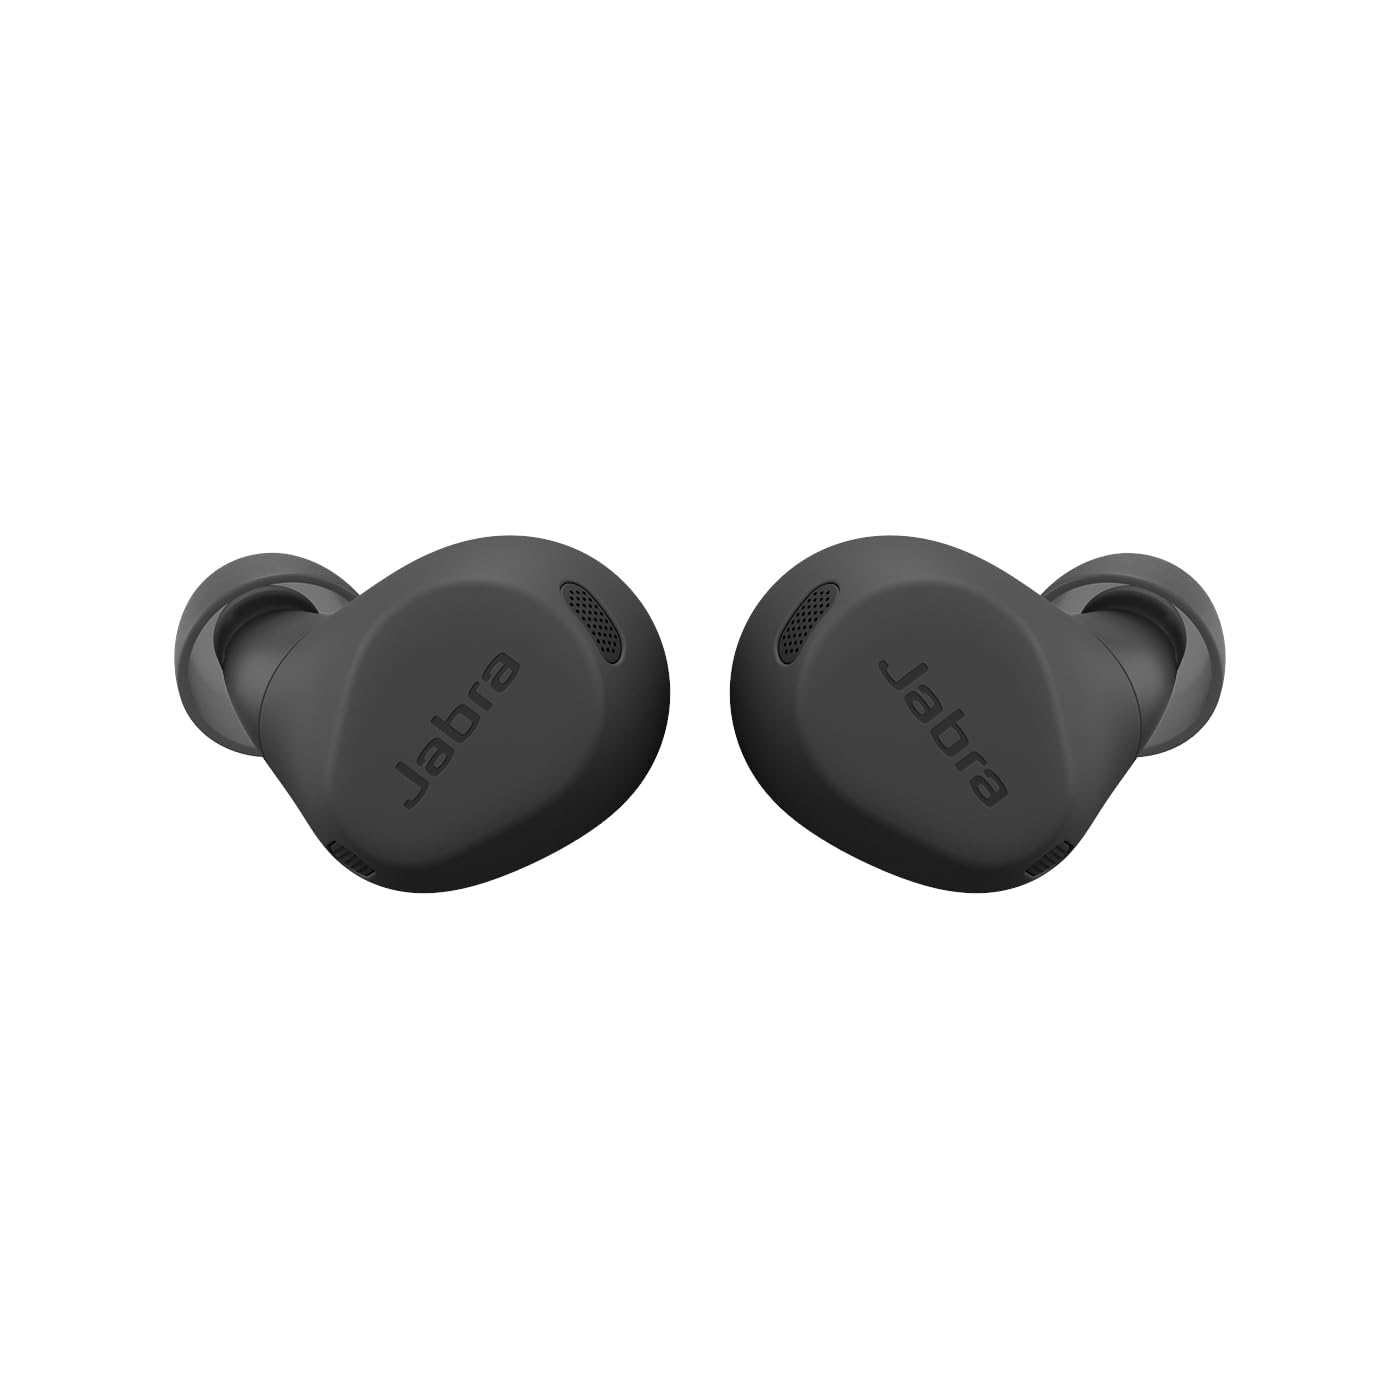 Jabra Elite 8 Active - Best and Most Advanced Sports Wireless Bluetooth Earbuds with Comfortable Secure Fit, Military Grade Durability, Active Noise Cancellation, for $134.99